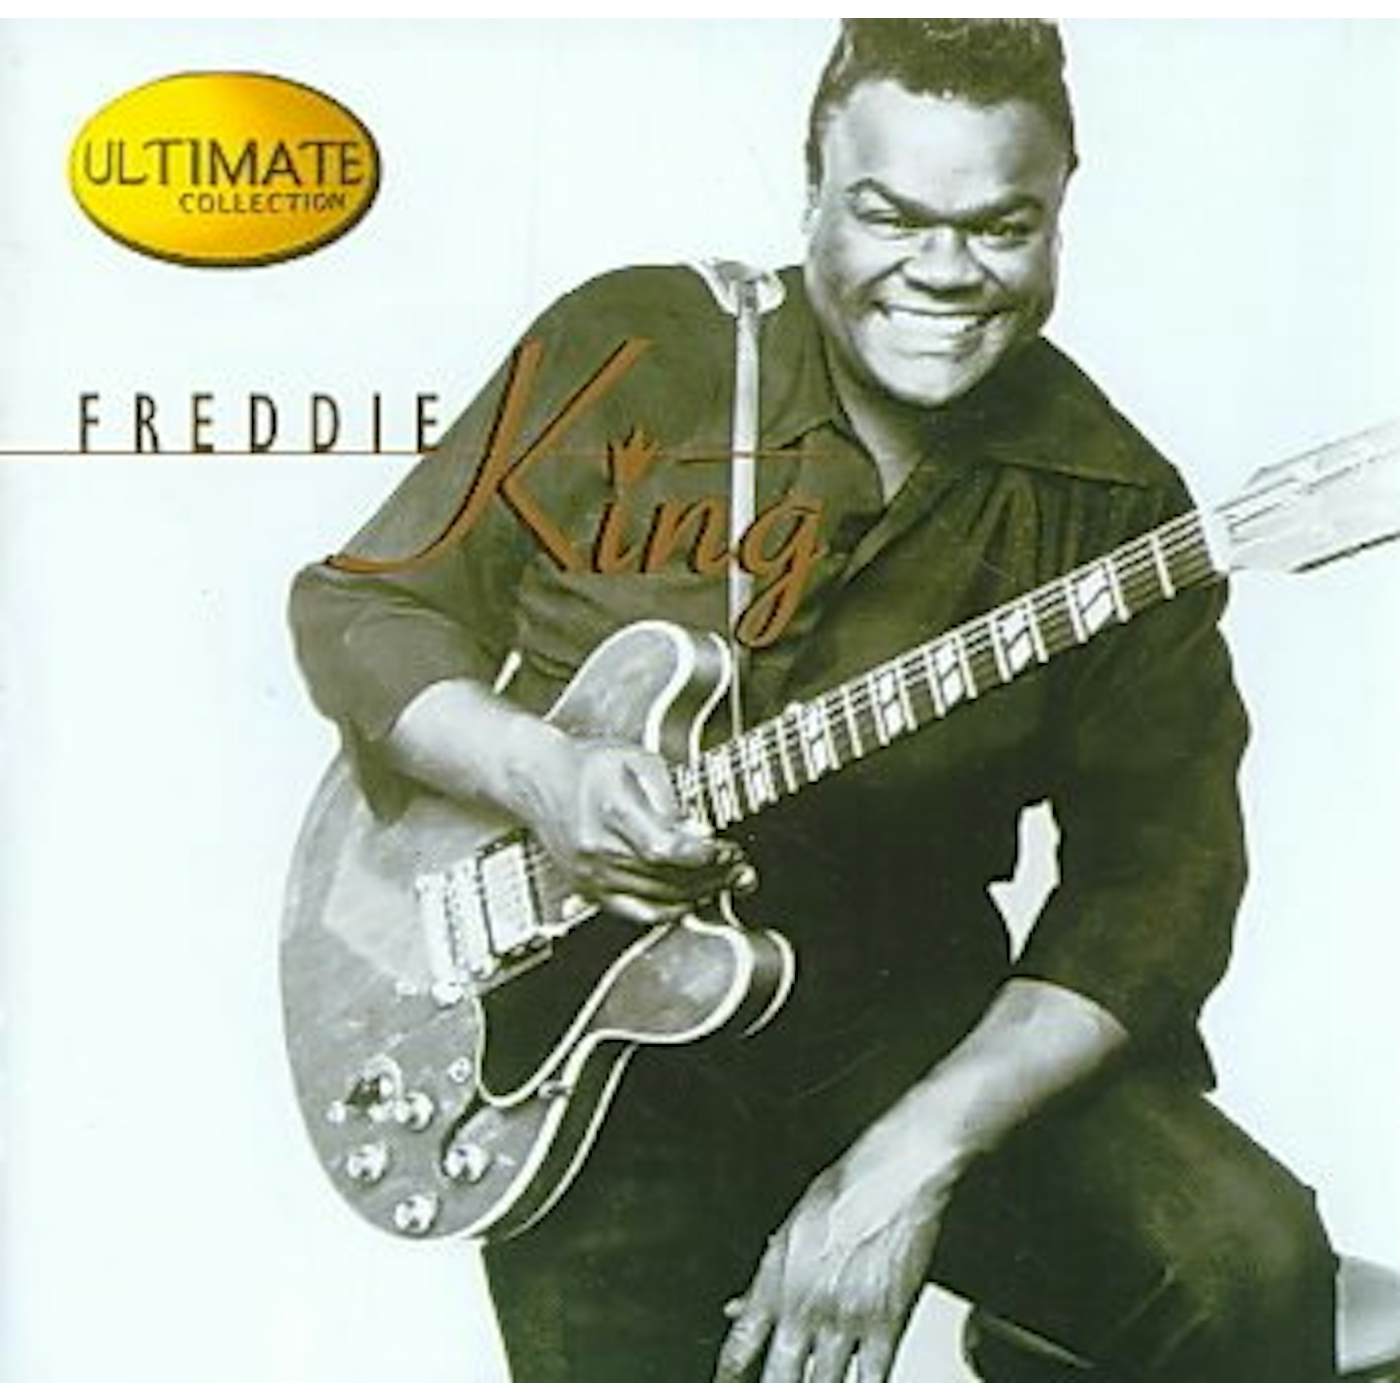 Freddie King ULTIMATE COLLECTION CD